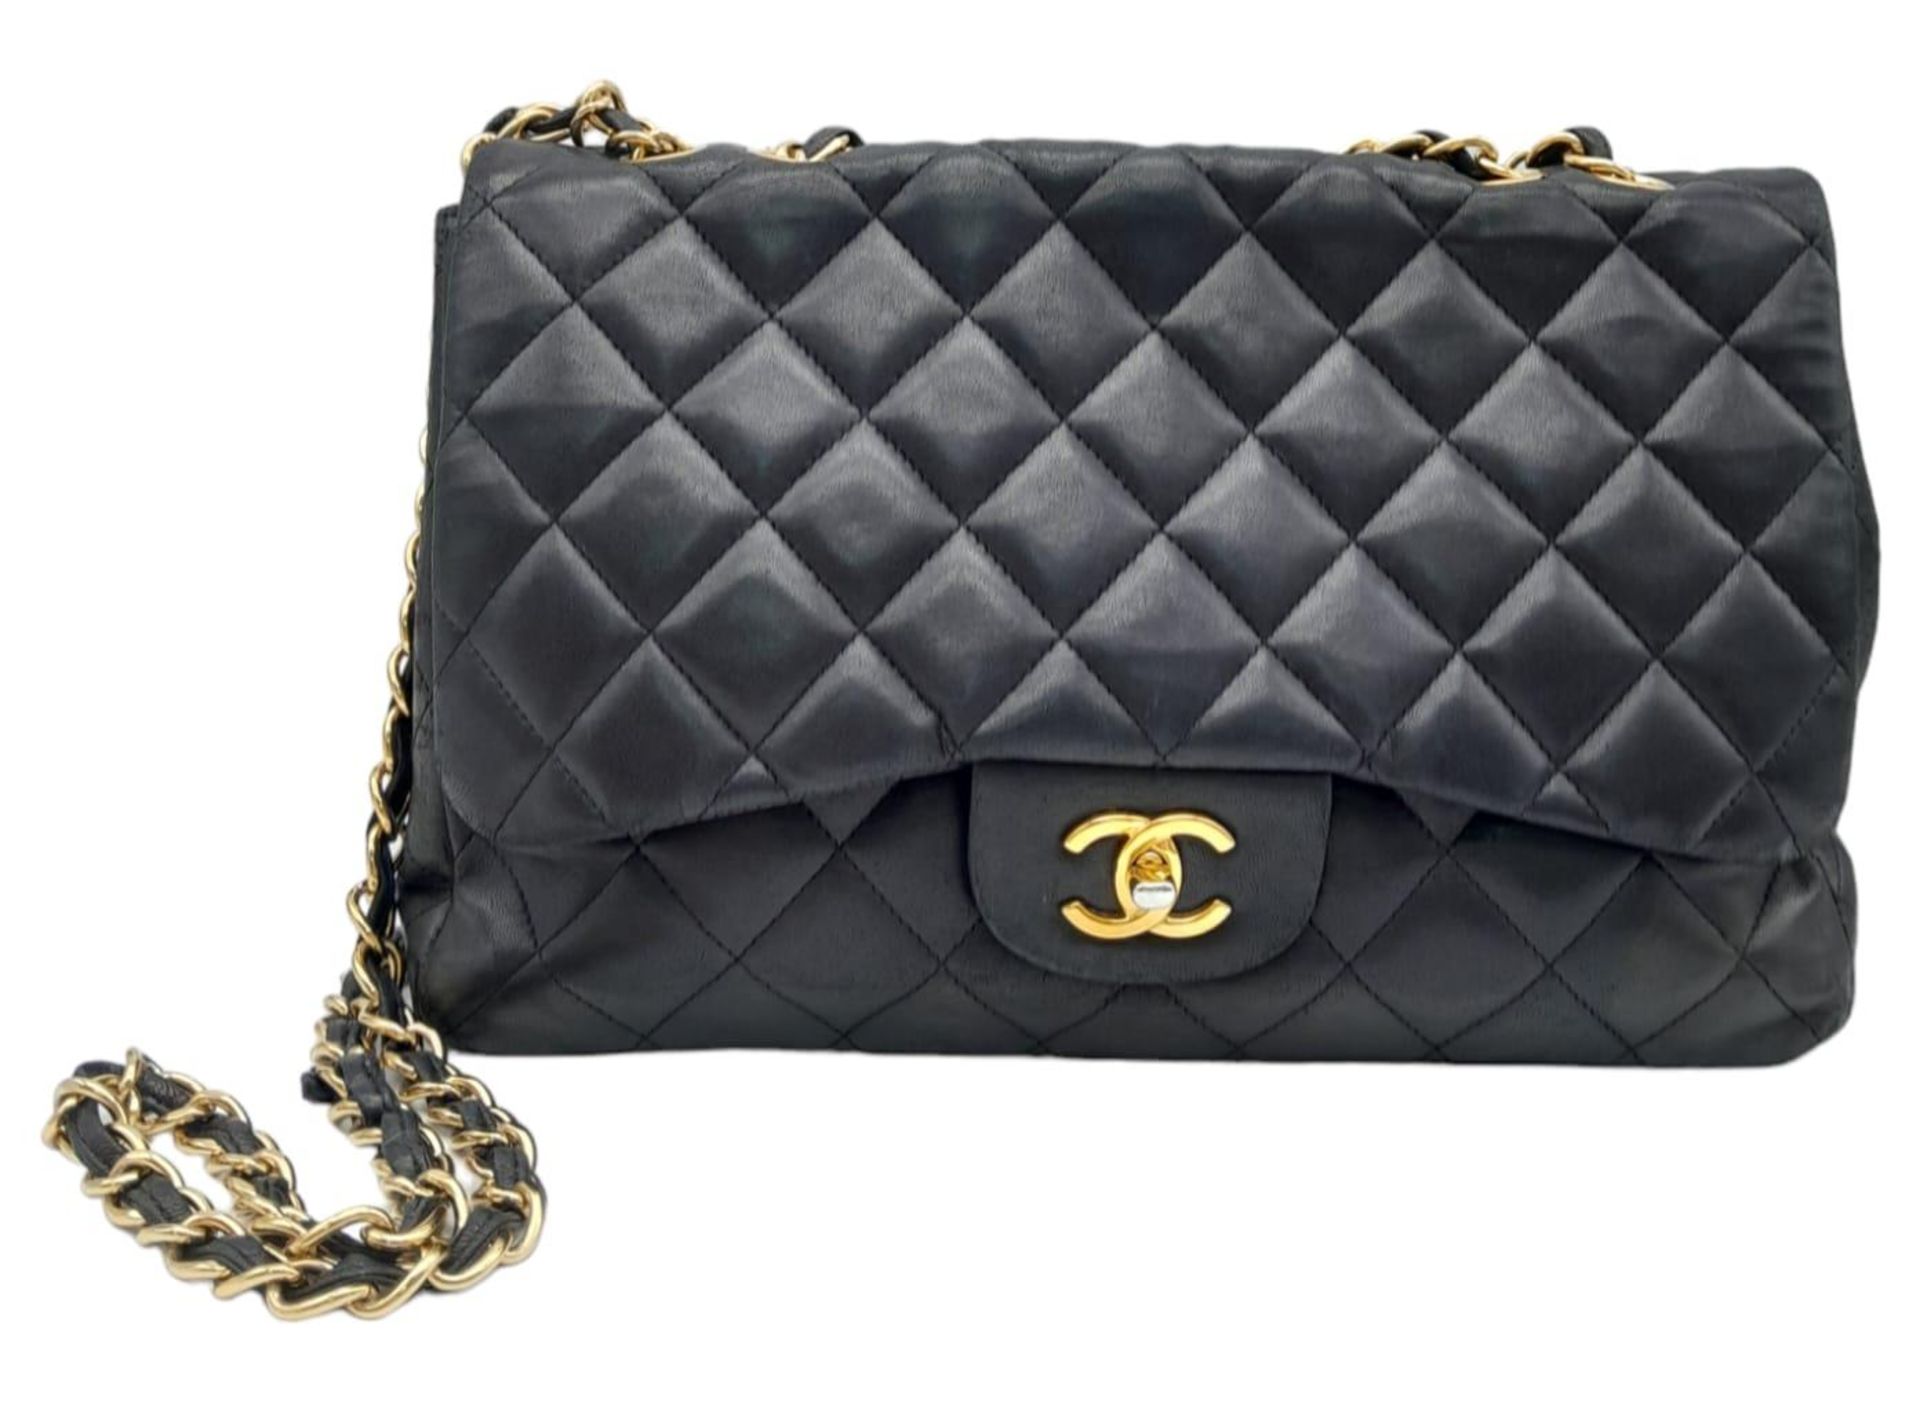 A Chanel Black Caviar Classic Single Flap Bag. Quilted pebbled leather exterior with gold-toned